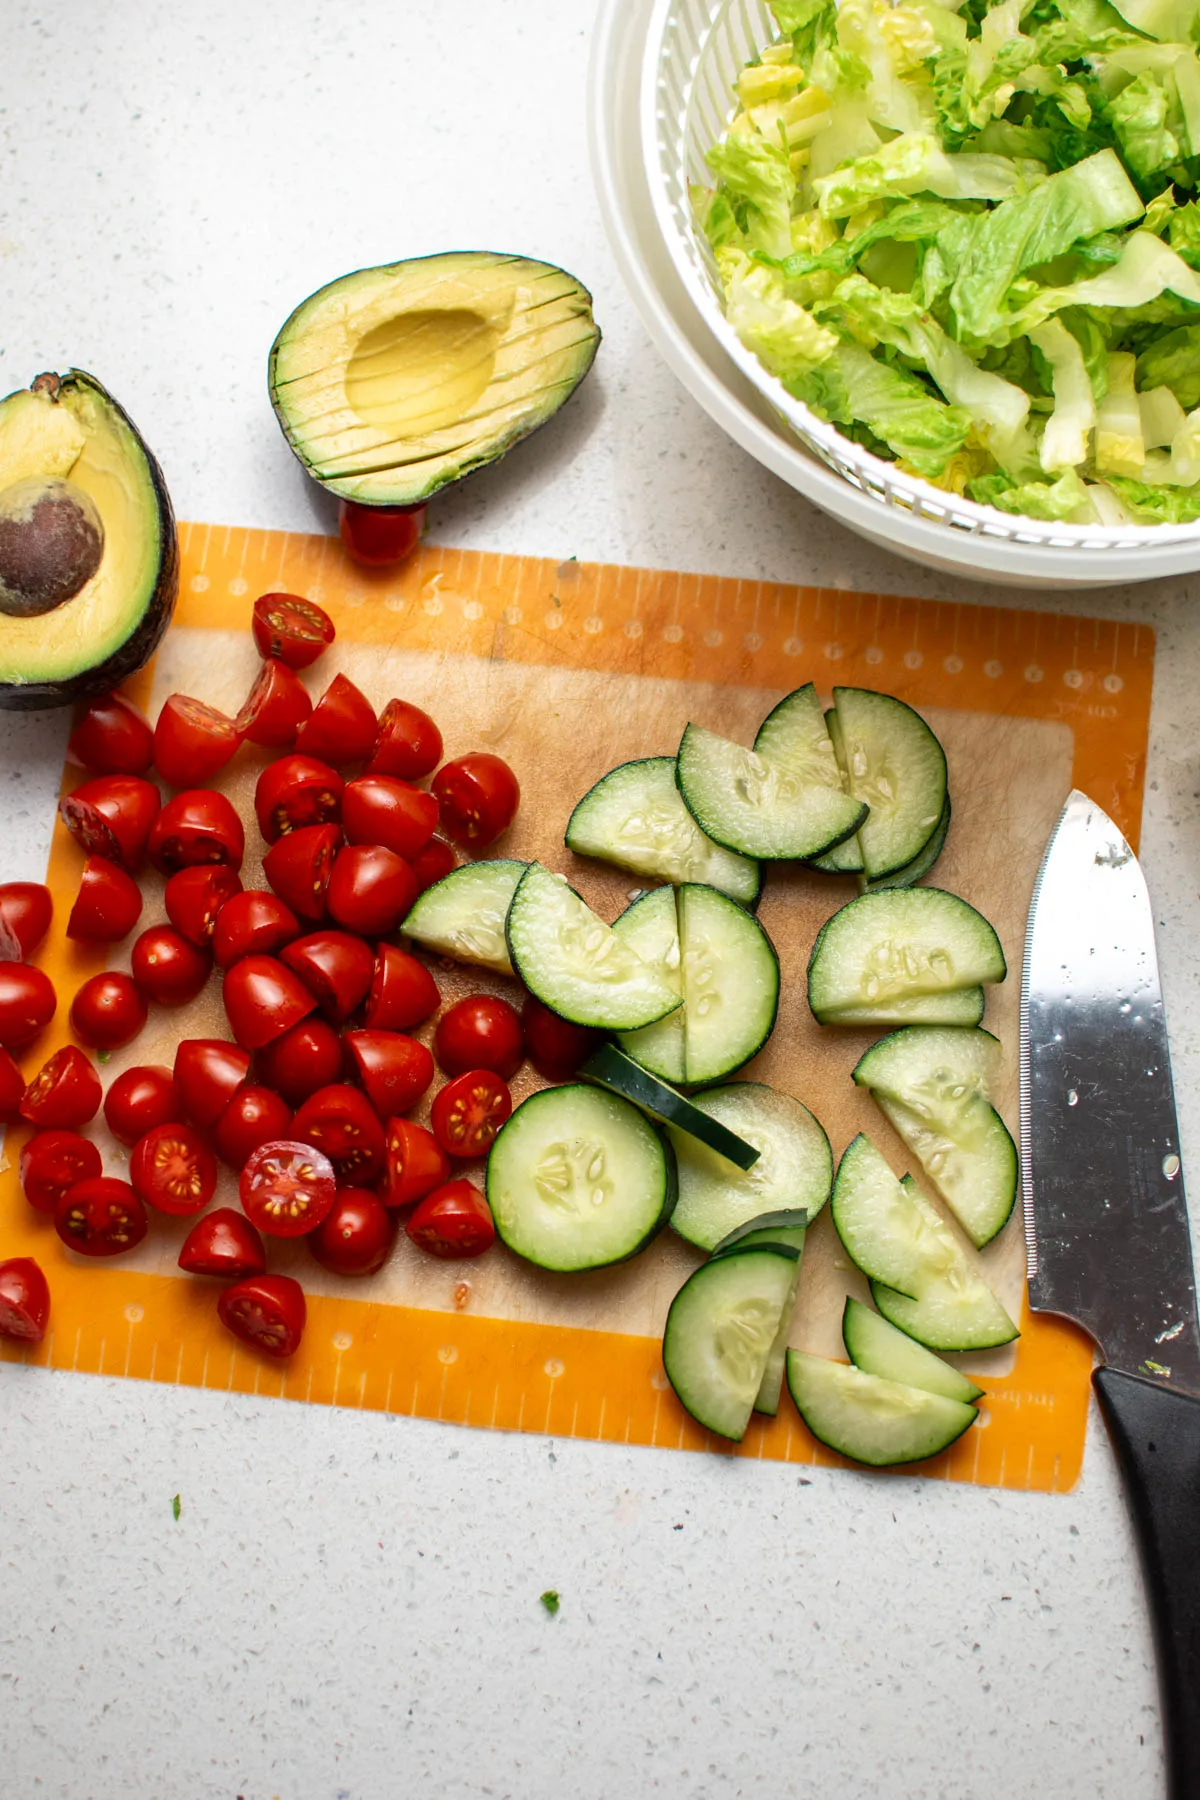 Chopped tomatoes, cucumbers, and avocado halves next to bowl of washed lettuce.